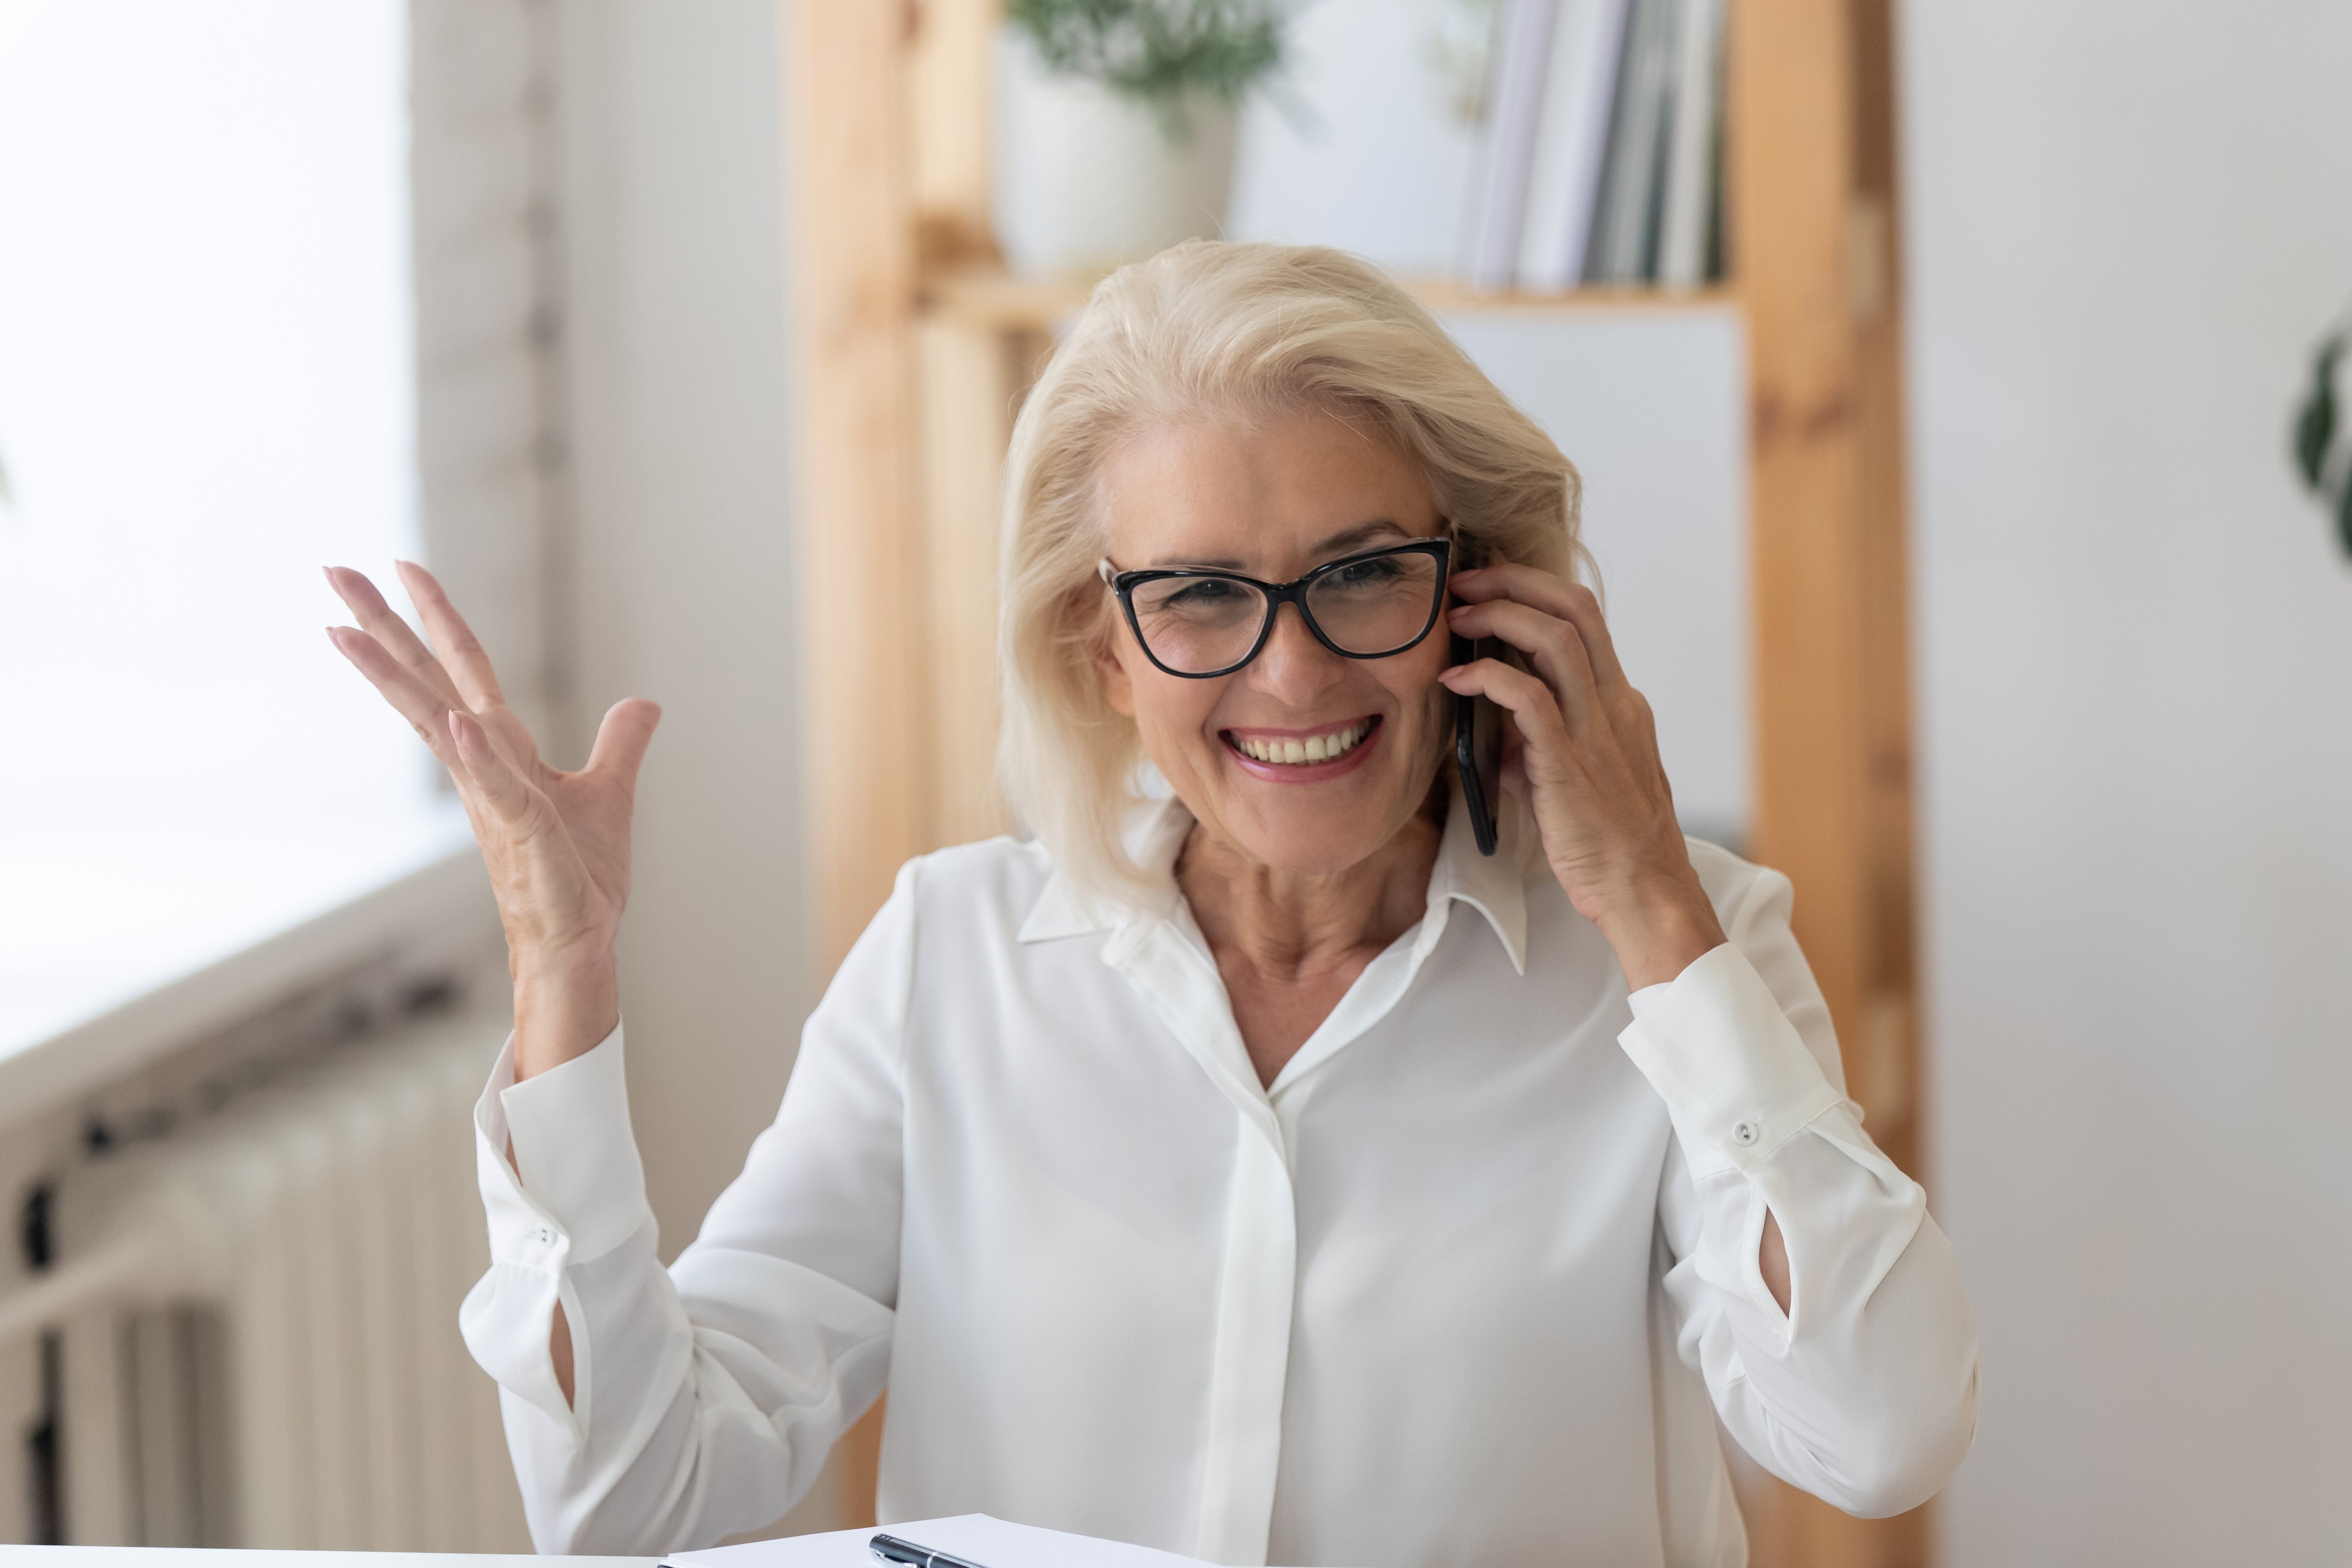 Elderly woman smiling while talking on the phone. │Source: Shutterstock